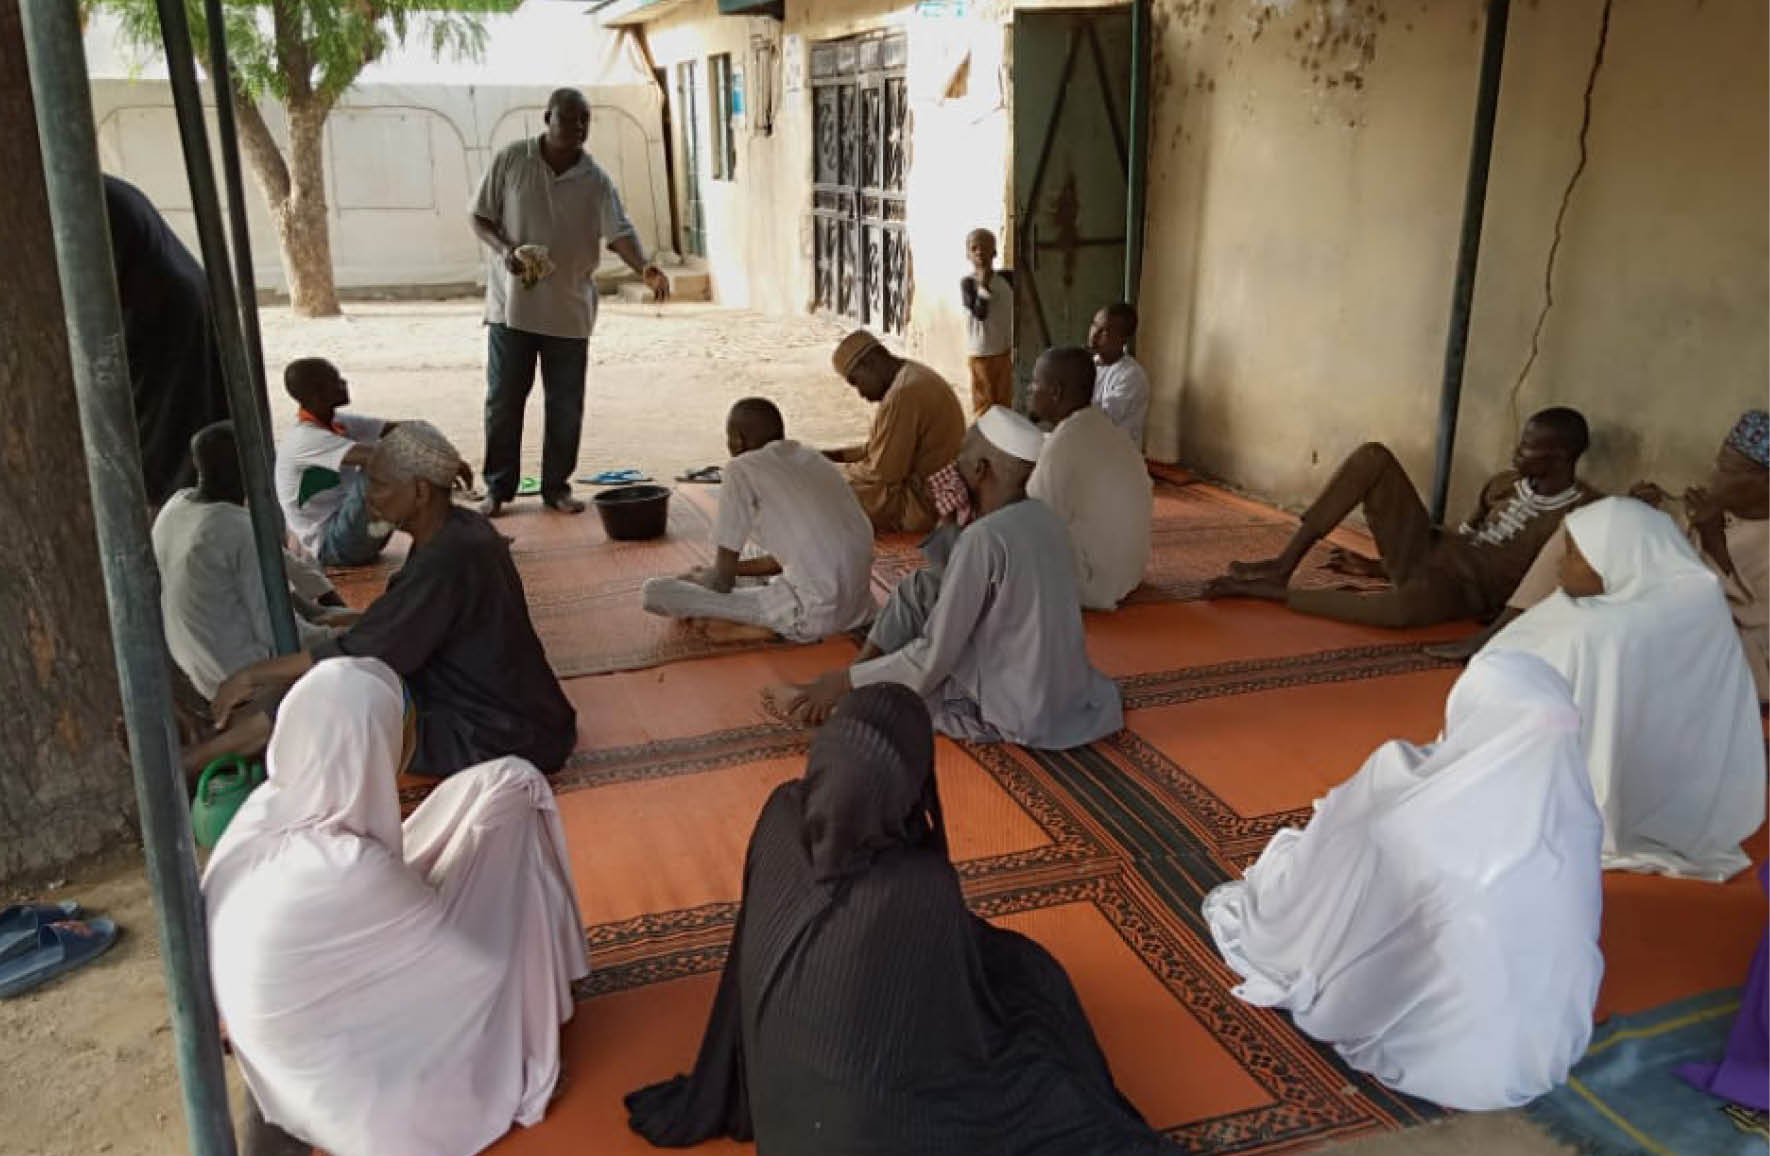 A man speaks to a group of men and women in Nigeria, gesturing openly while the group listen